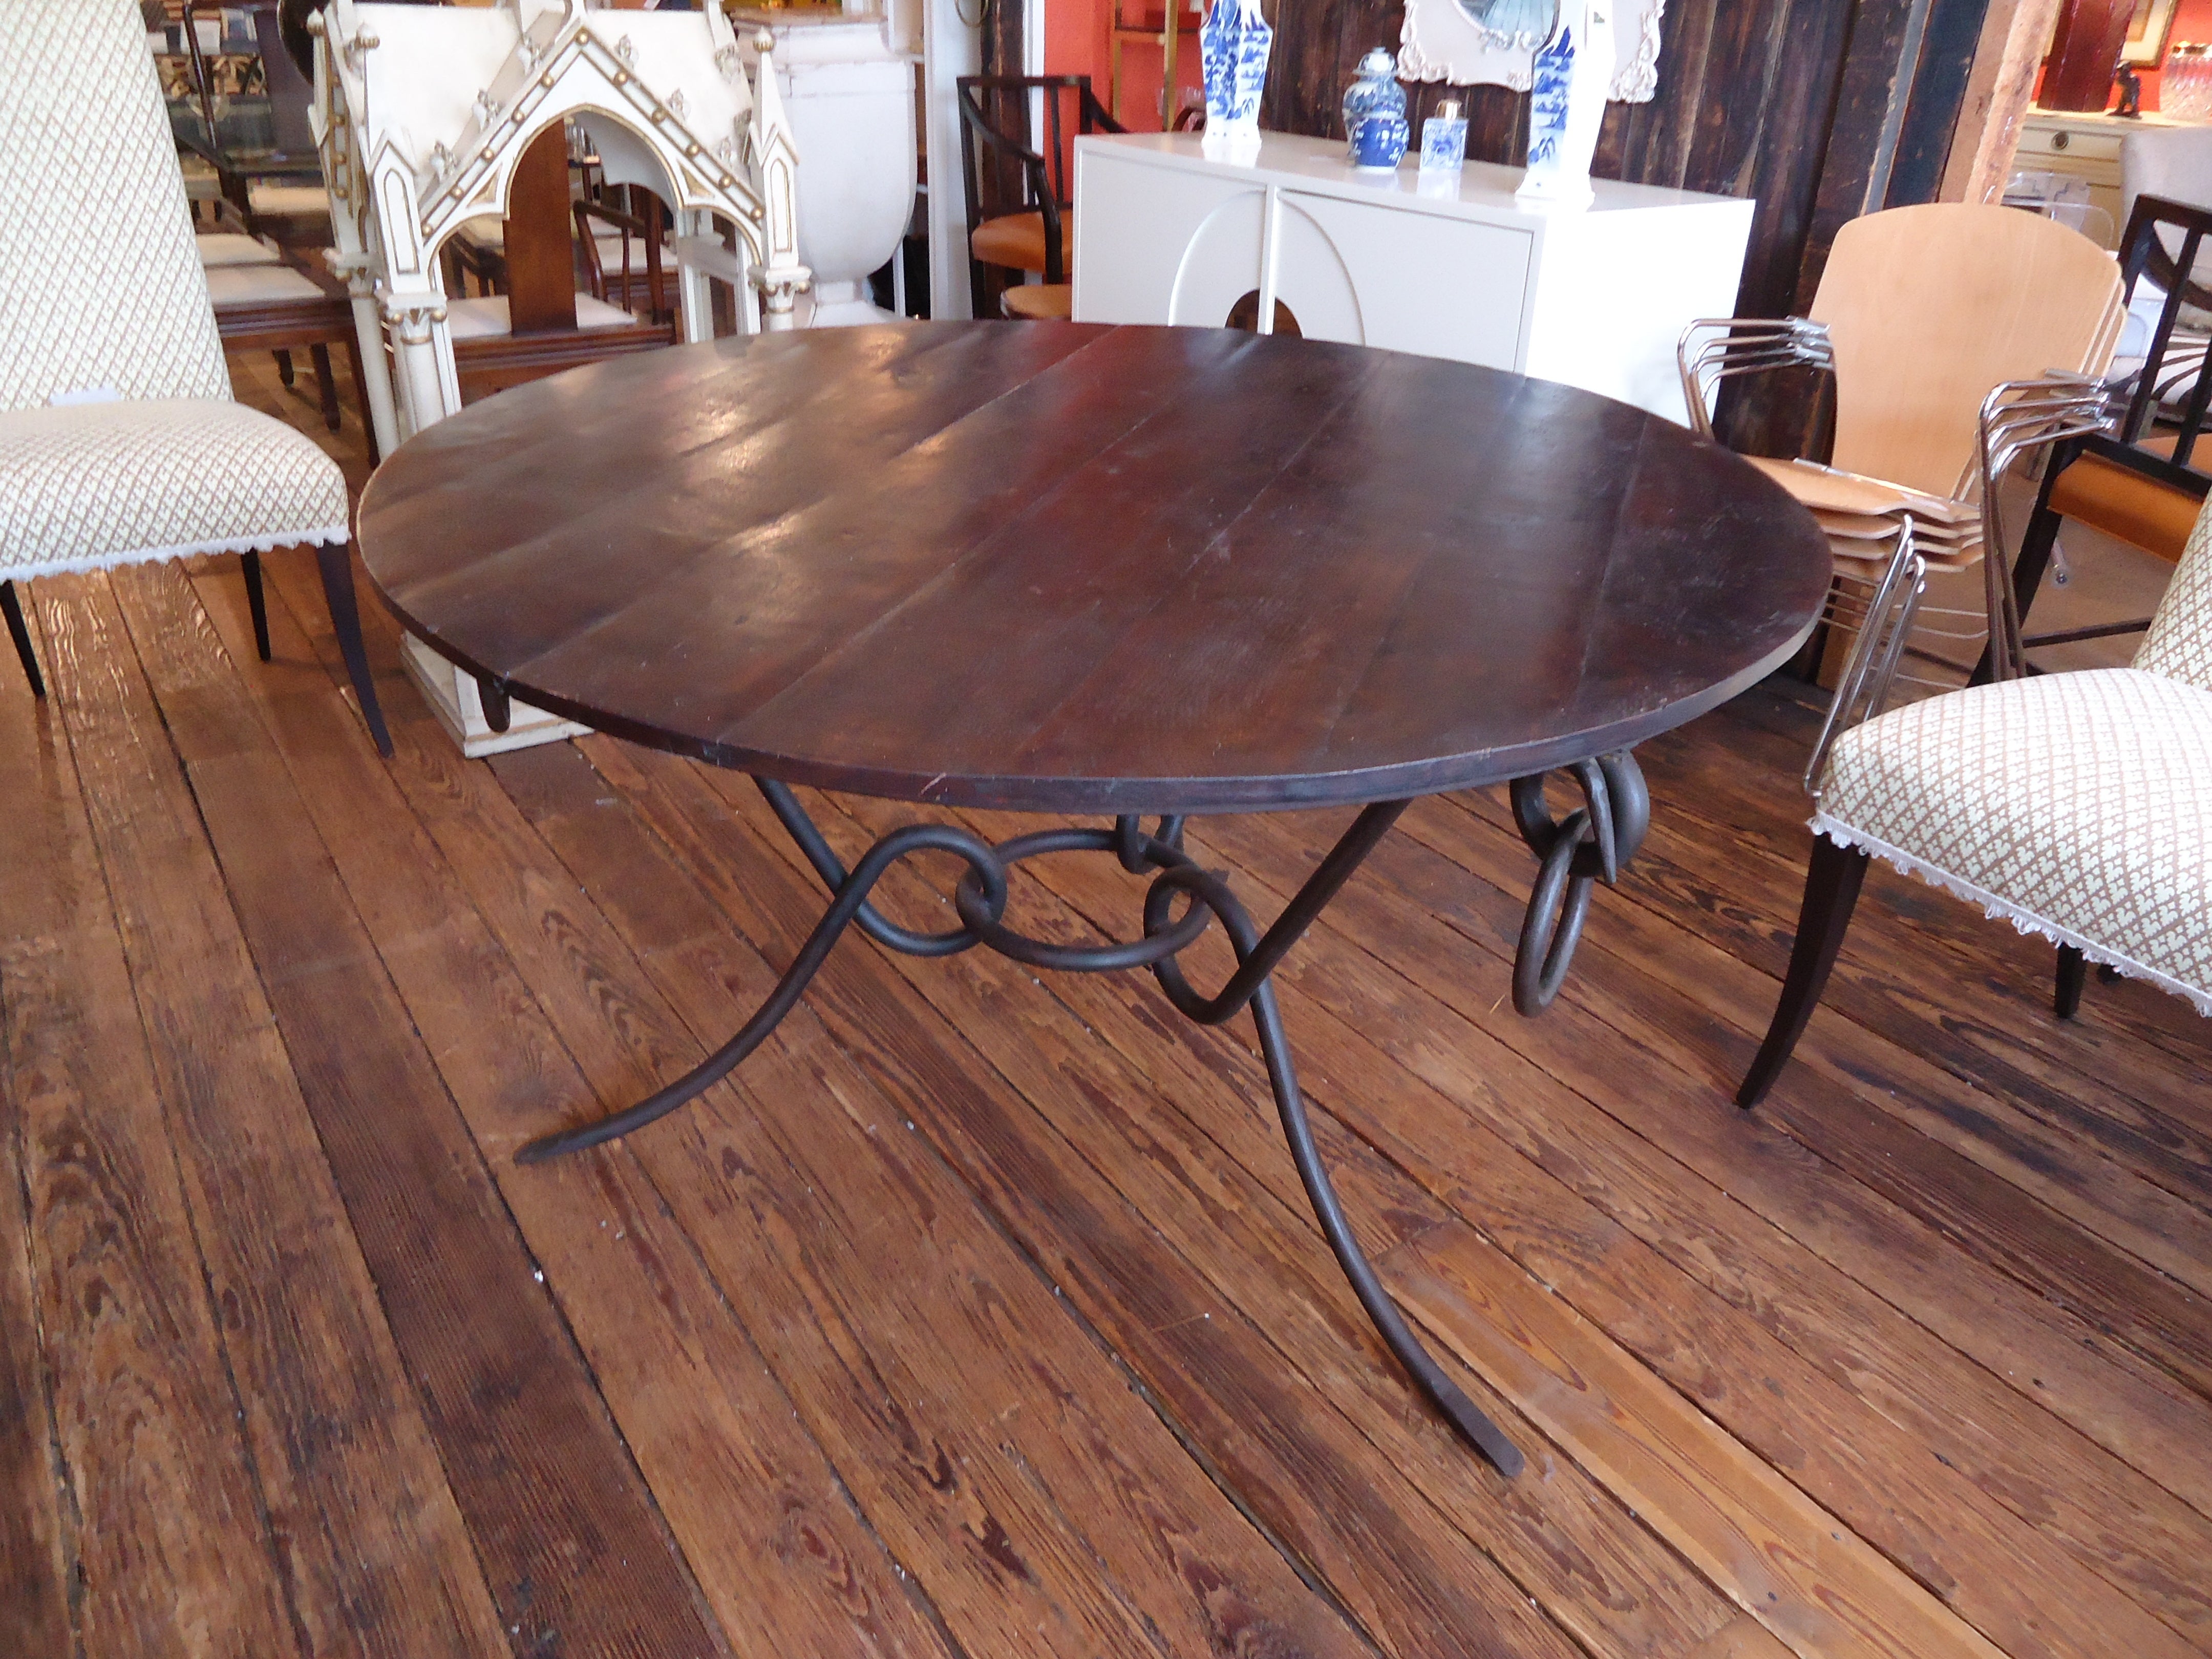 Round Rustic Wood Dining Table on Iron Base